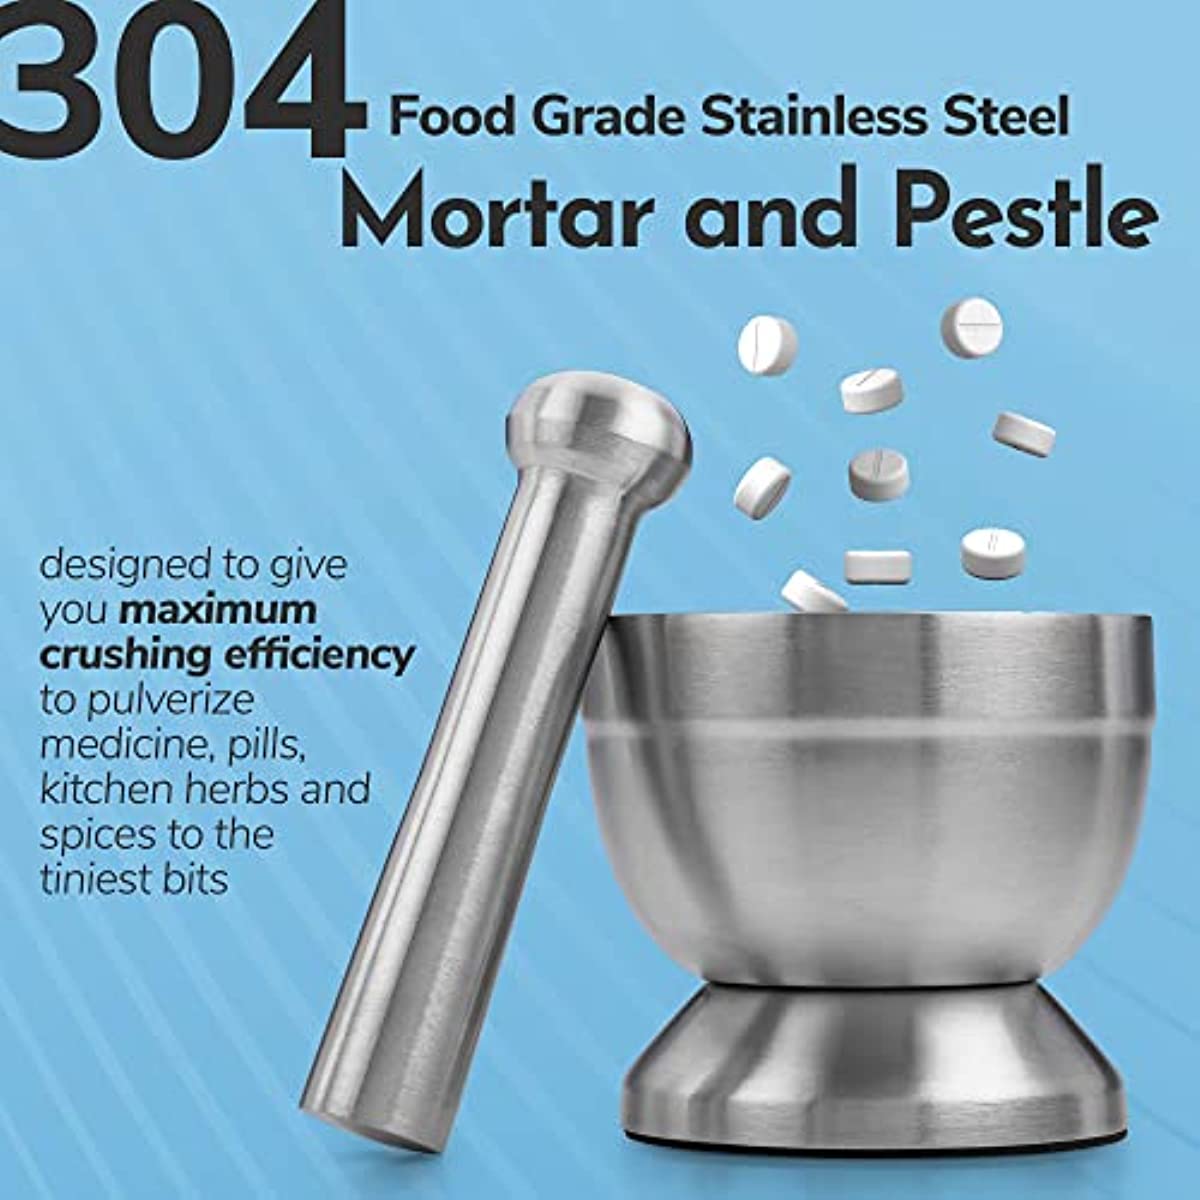 Pill Crusher - 304 Food Grade Stainless Steel Mortar and Pestle Medicine Grinder Set - Non-Slip Splitter to Easily Crush Medicine Pills Tablets Vitamins to Fine Powder for Adults, Seniors, Dogs, Pets